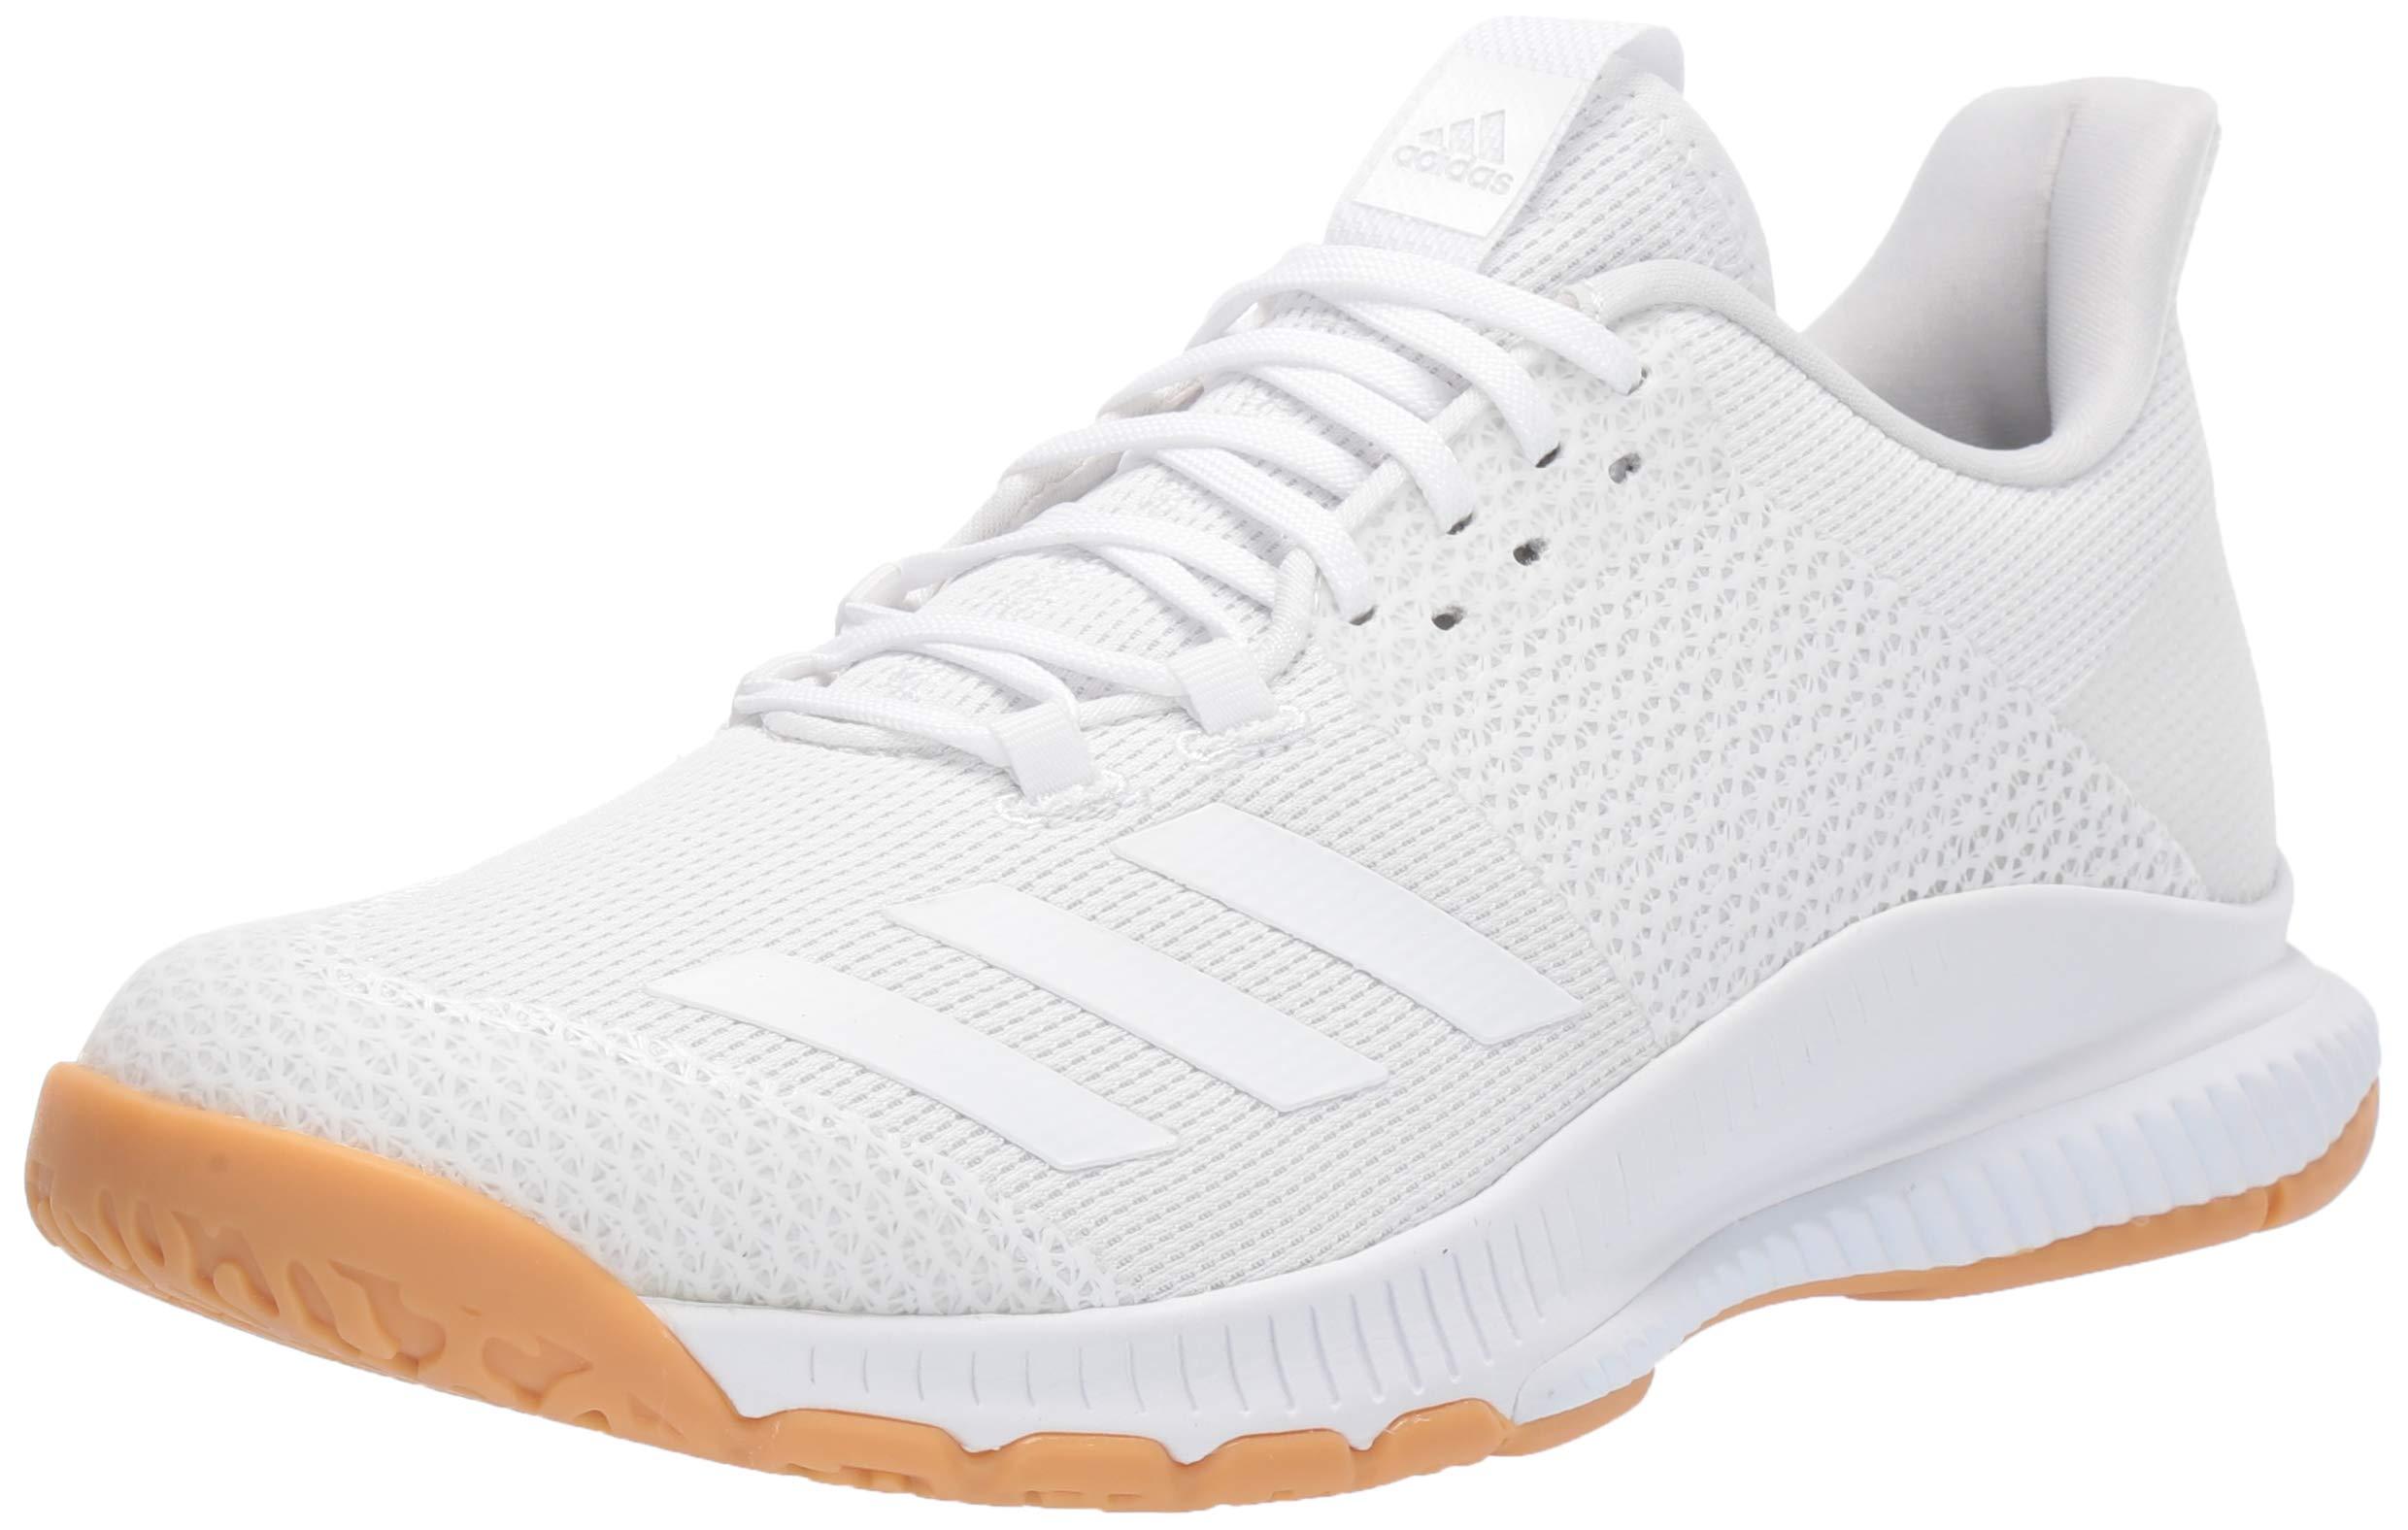 adidas Rubber Crazyflight Bounce 3 in White - Save 75% -